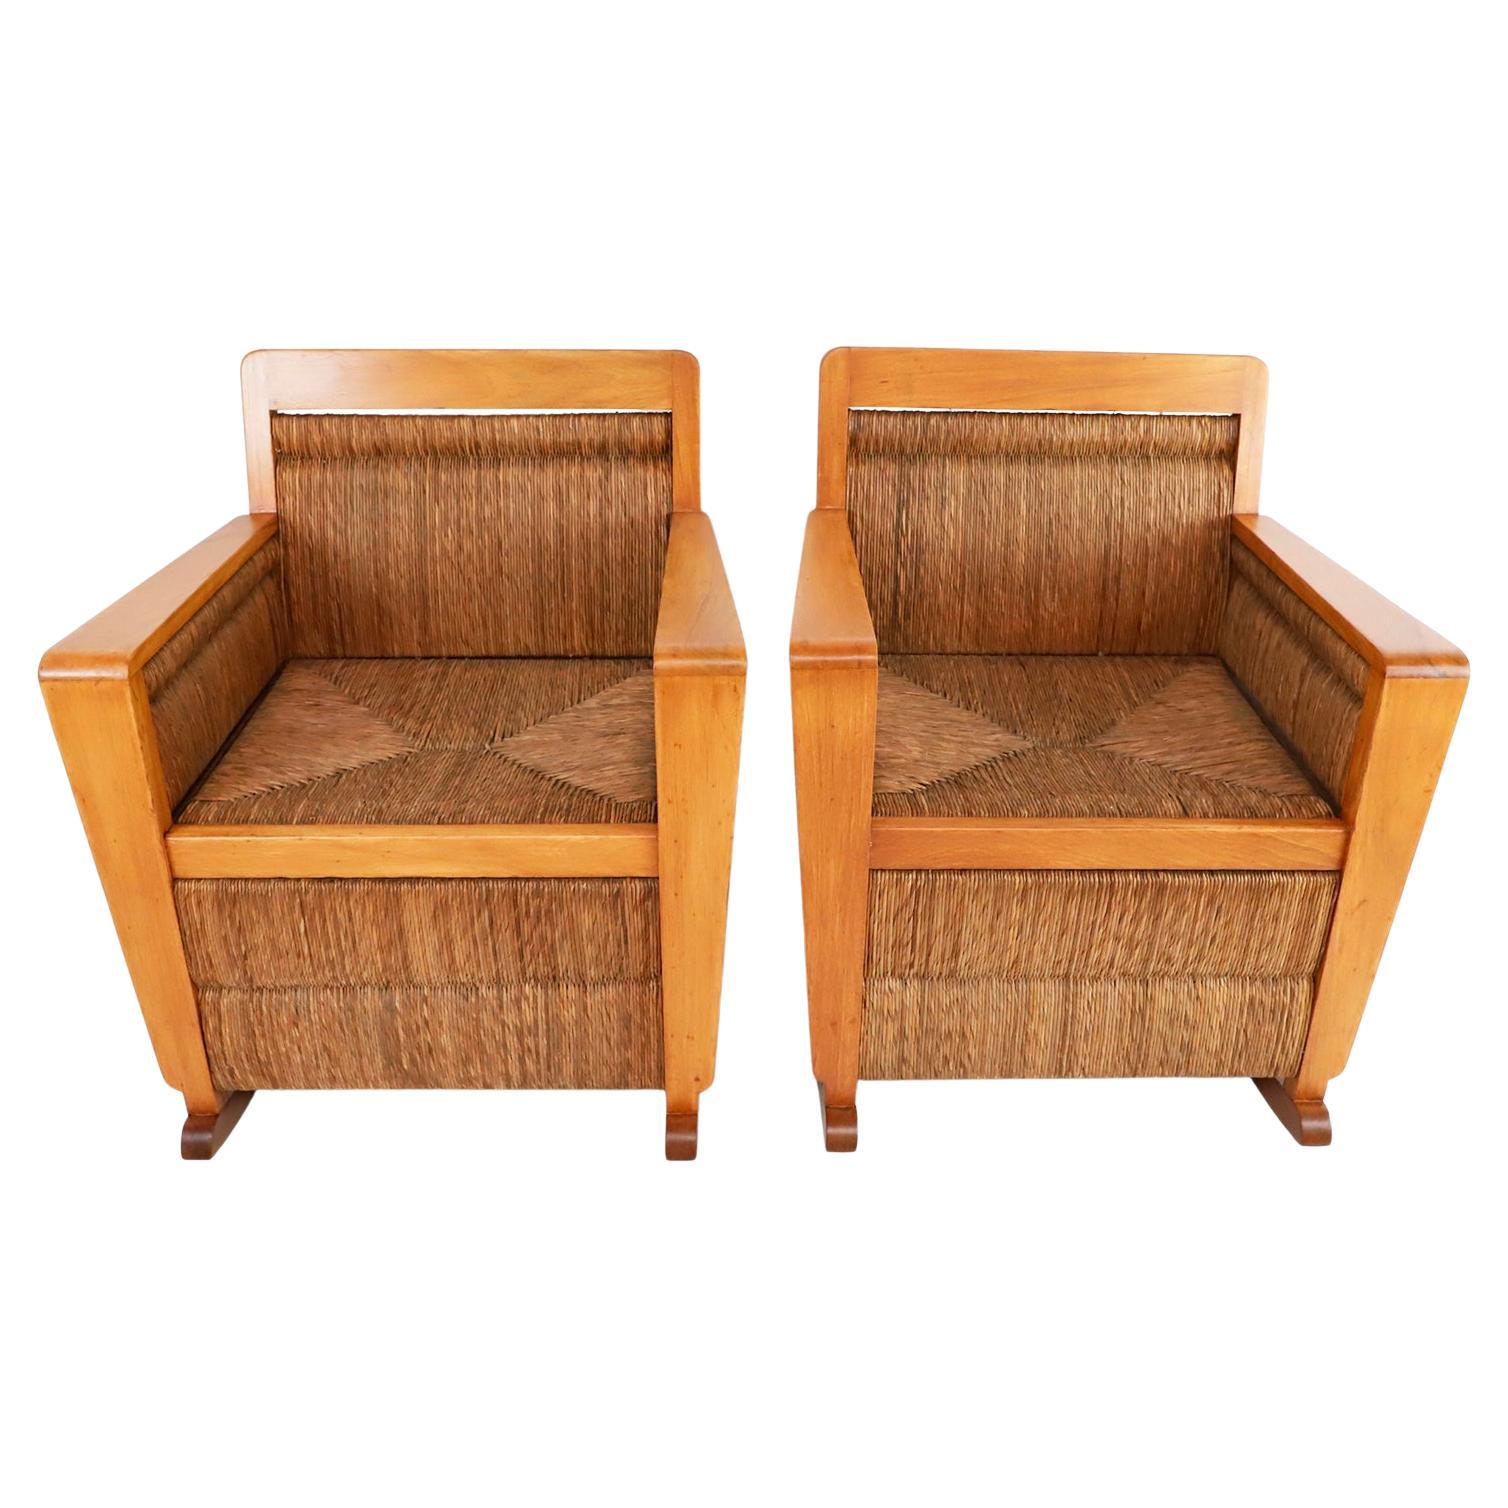 Pair of Mexican Mid-Century Modern Woven Rockingchairs For Sale